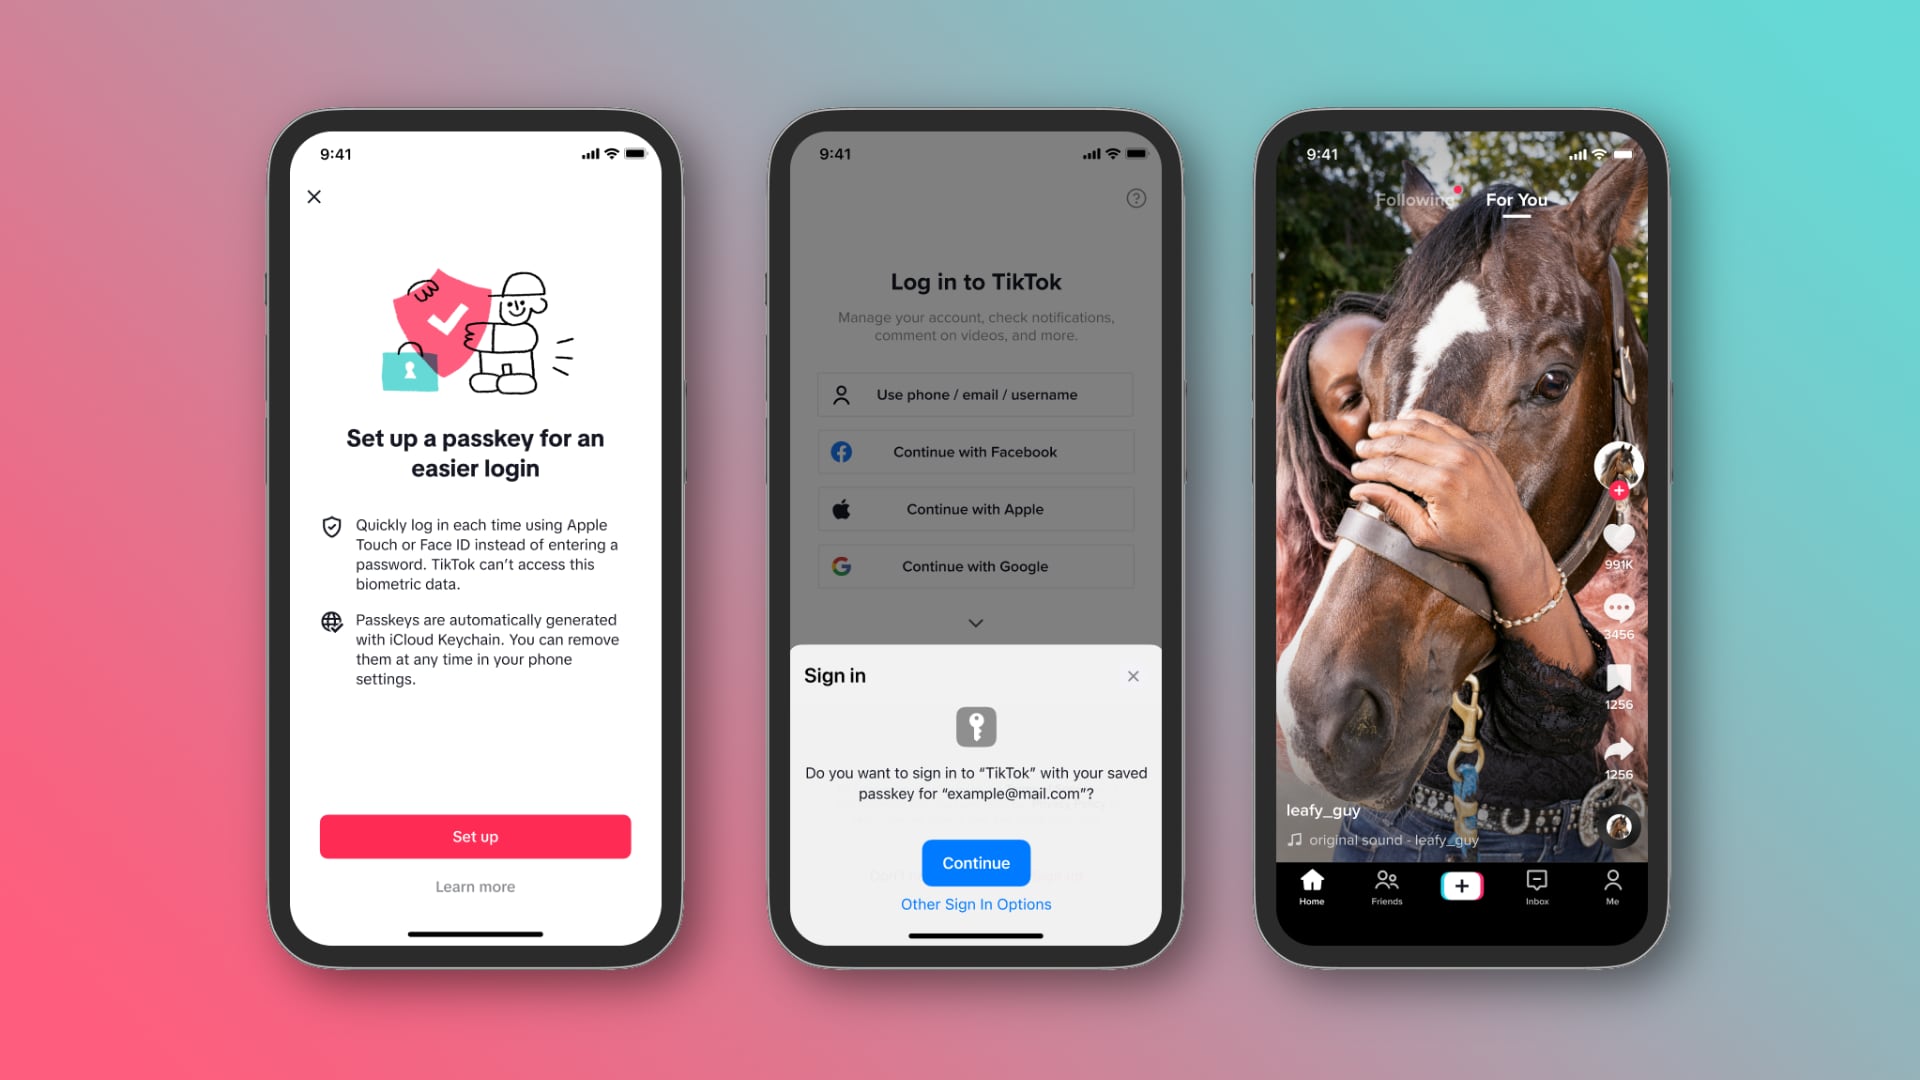 TikTok for iPhone brings passkey support for passwordless login authentication